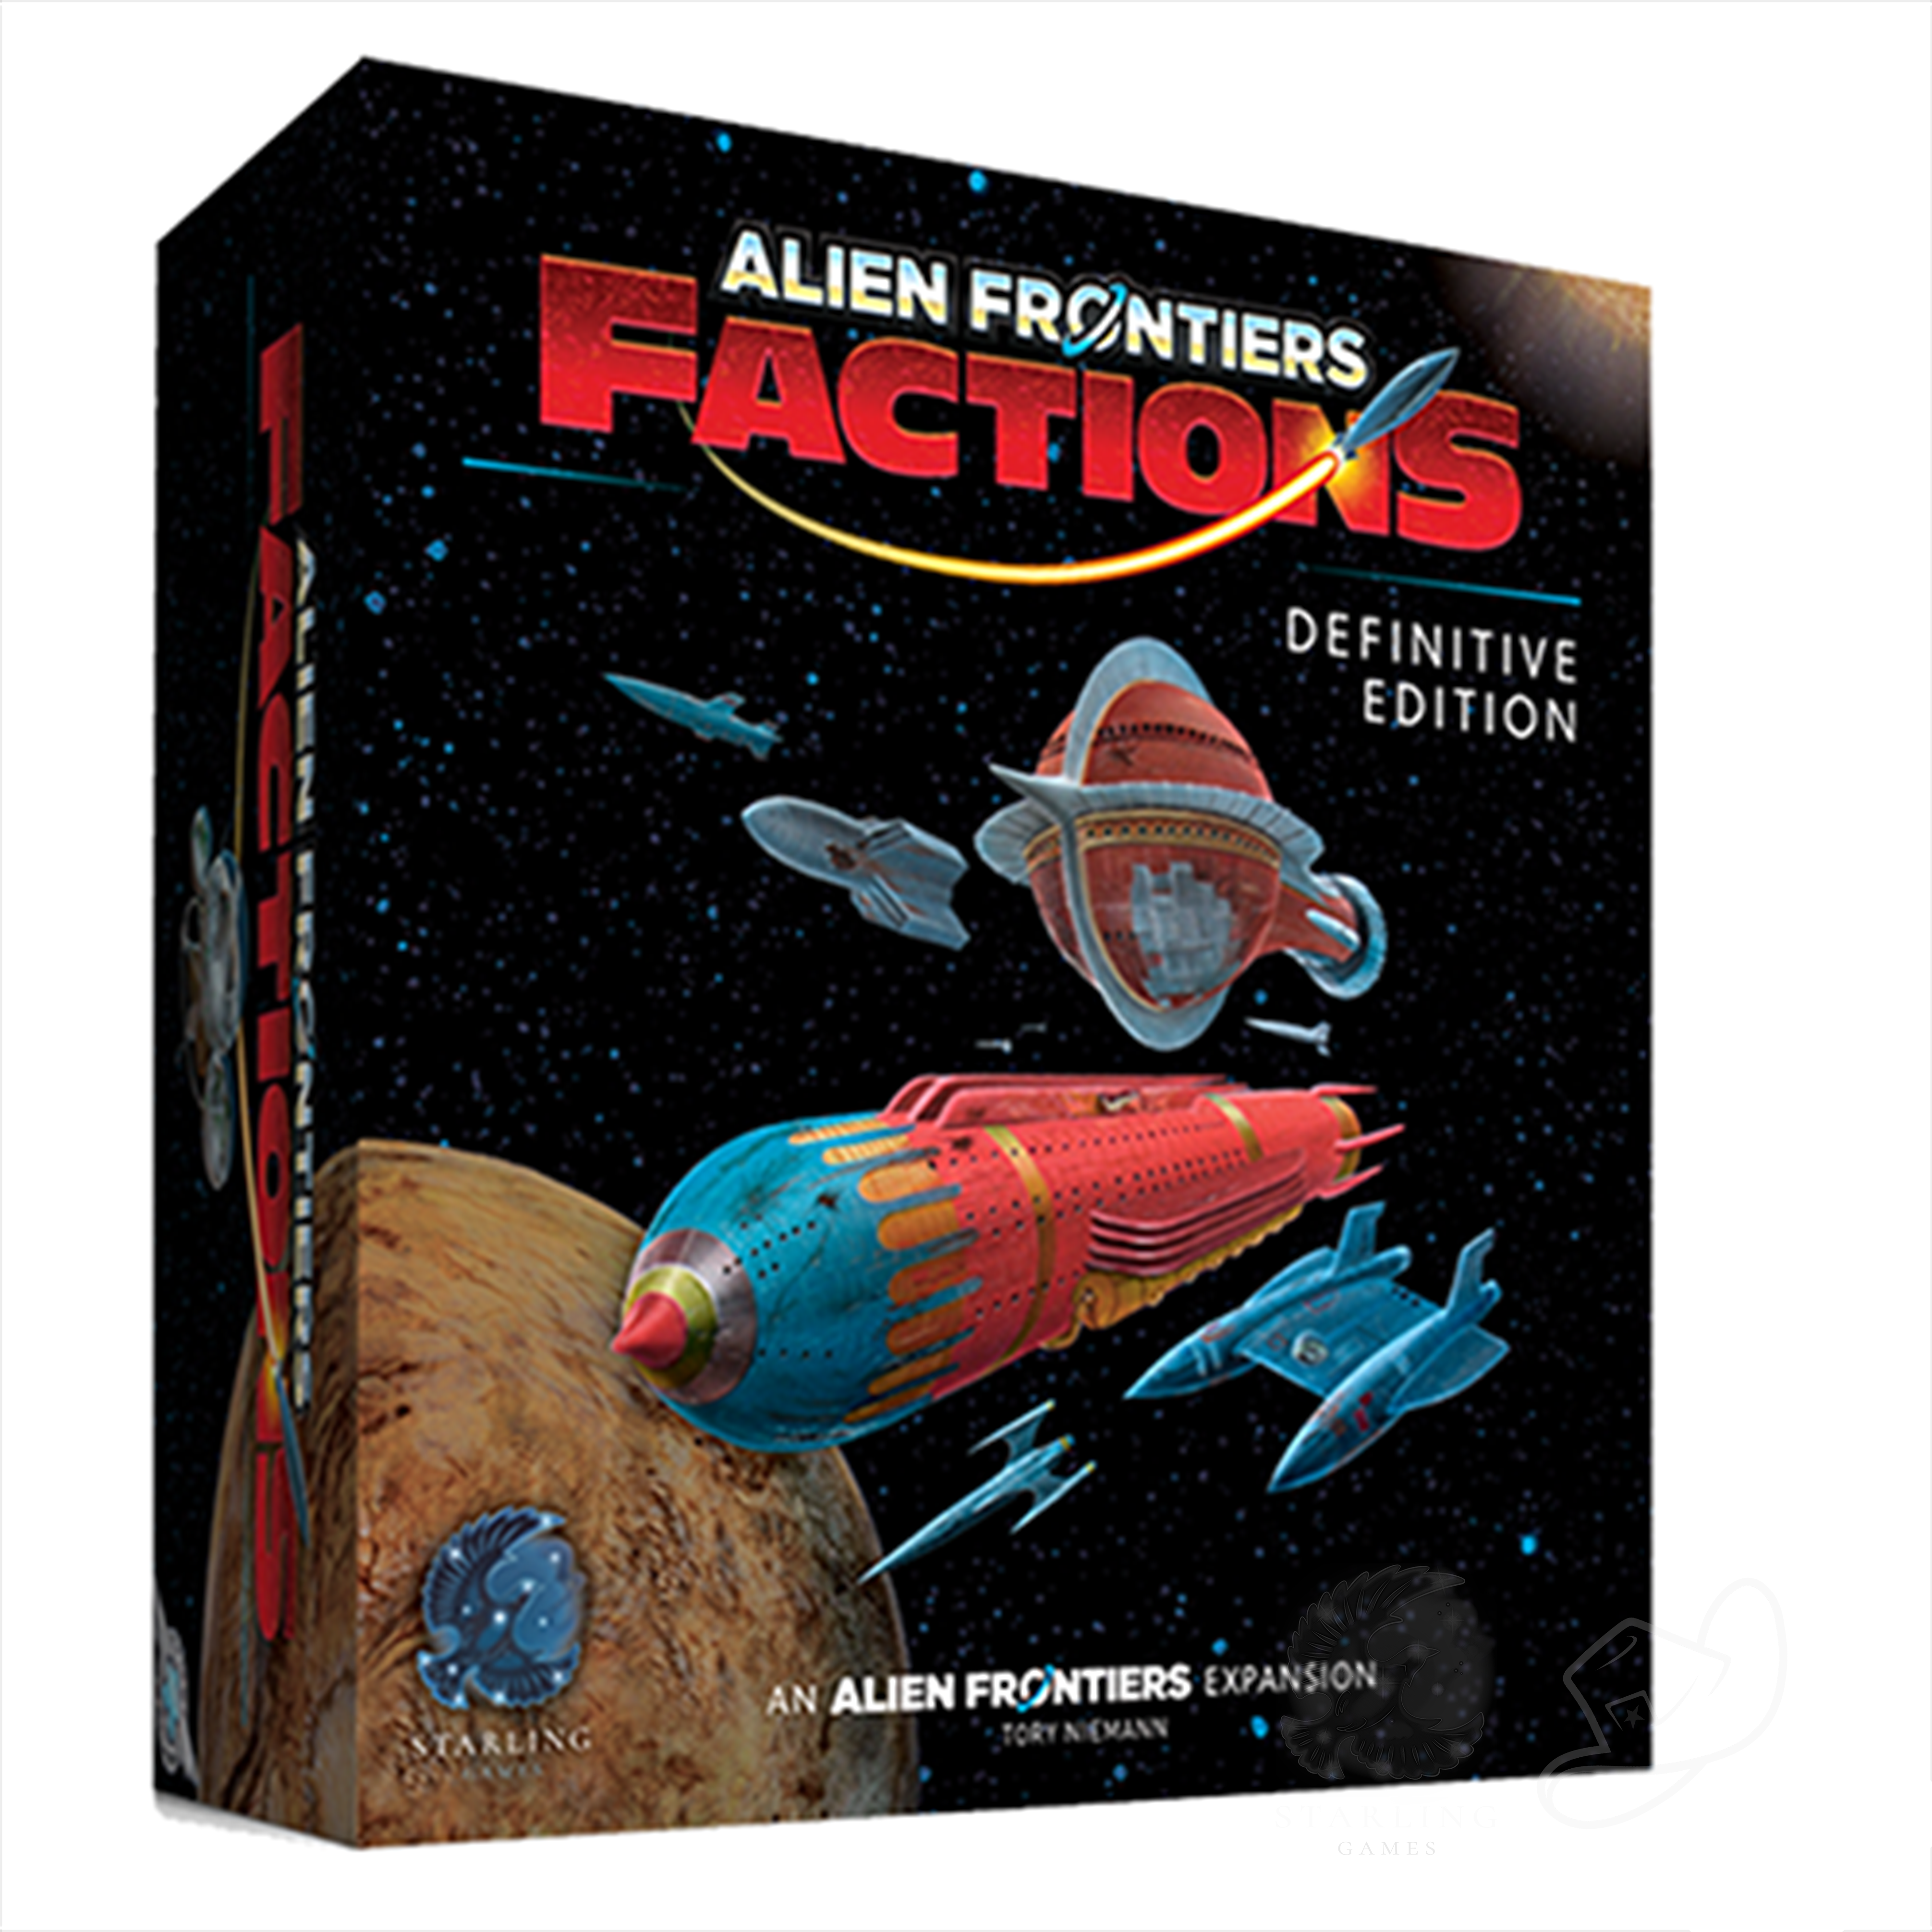 Alien Frontiers Factions Definitive Edition an Alien Frontiers expansion